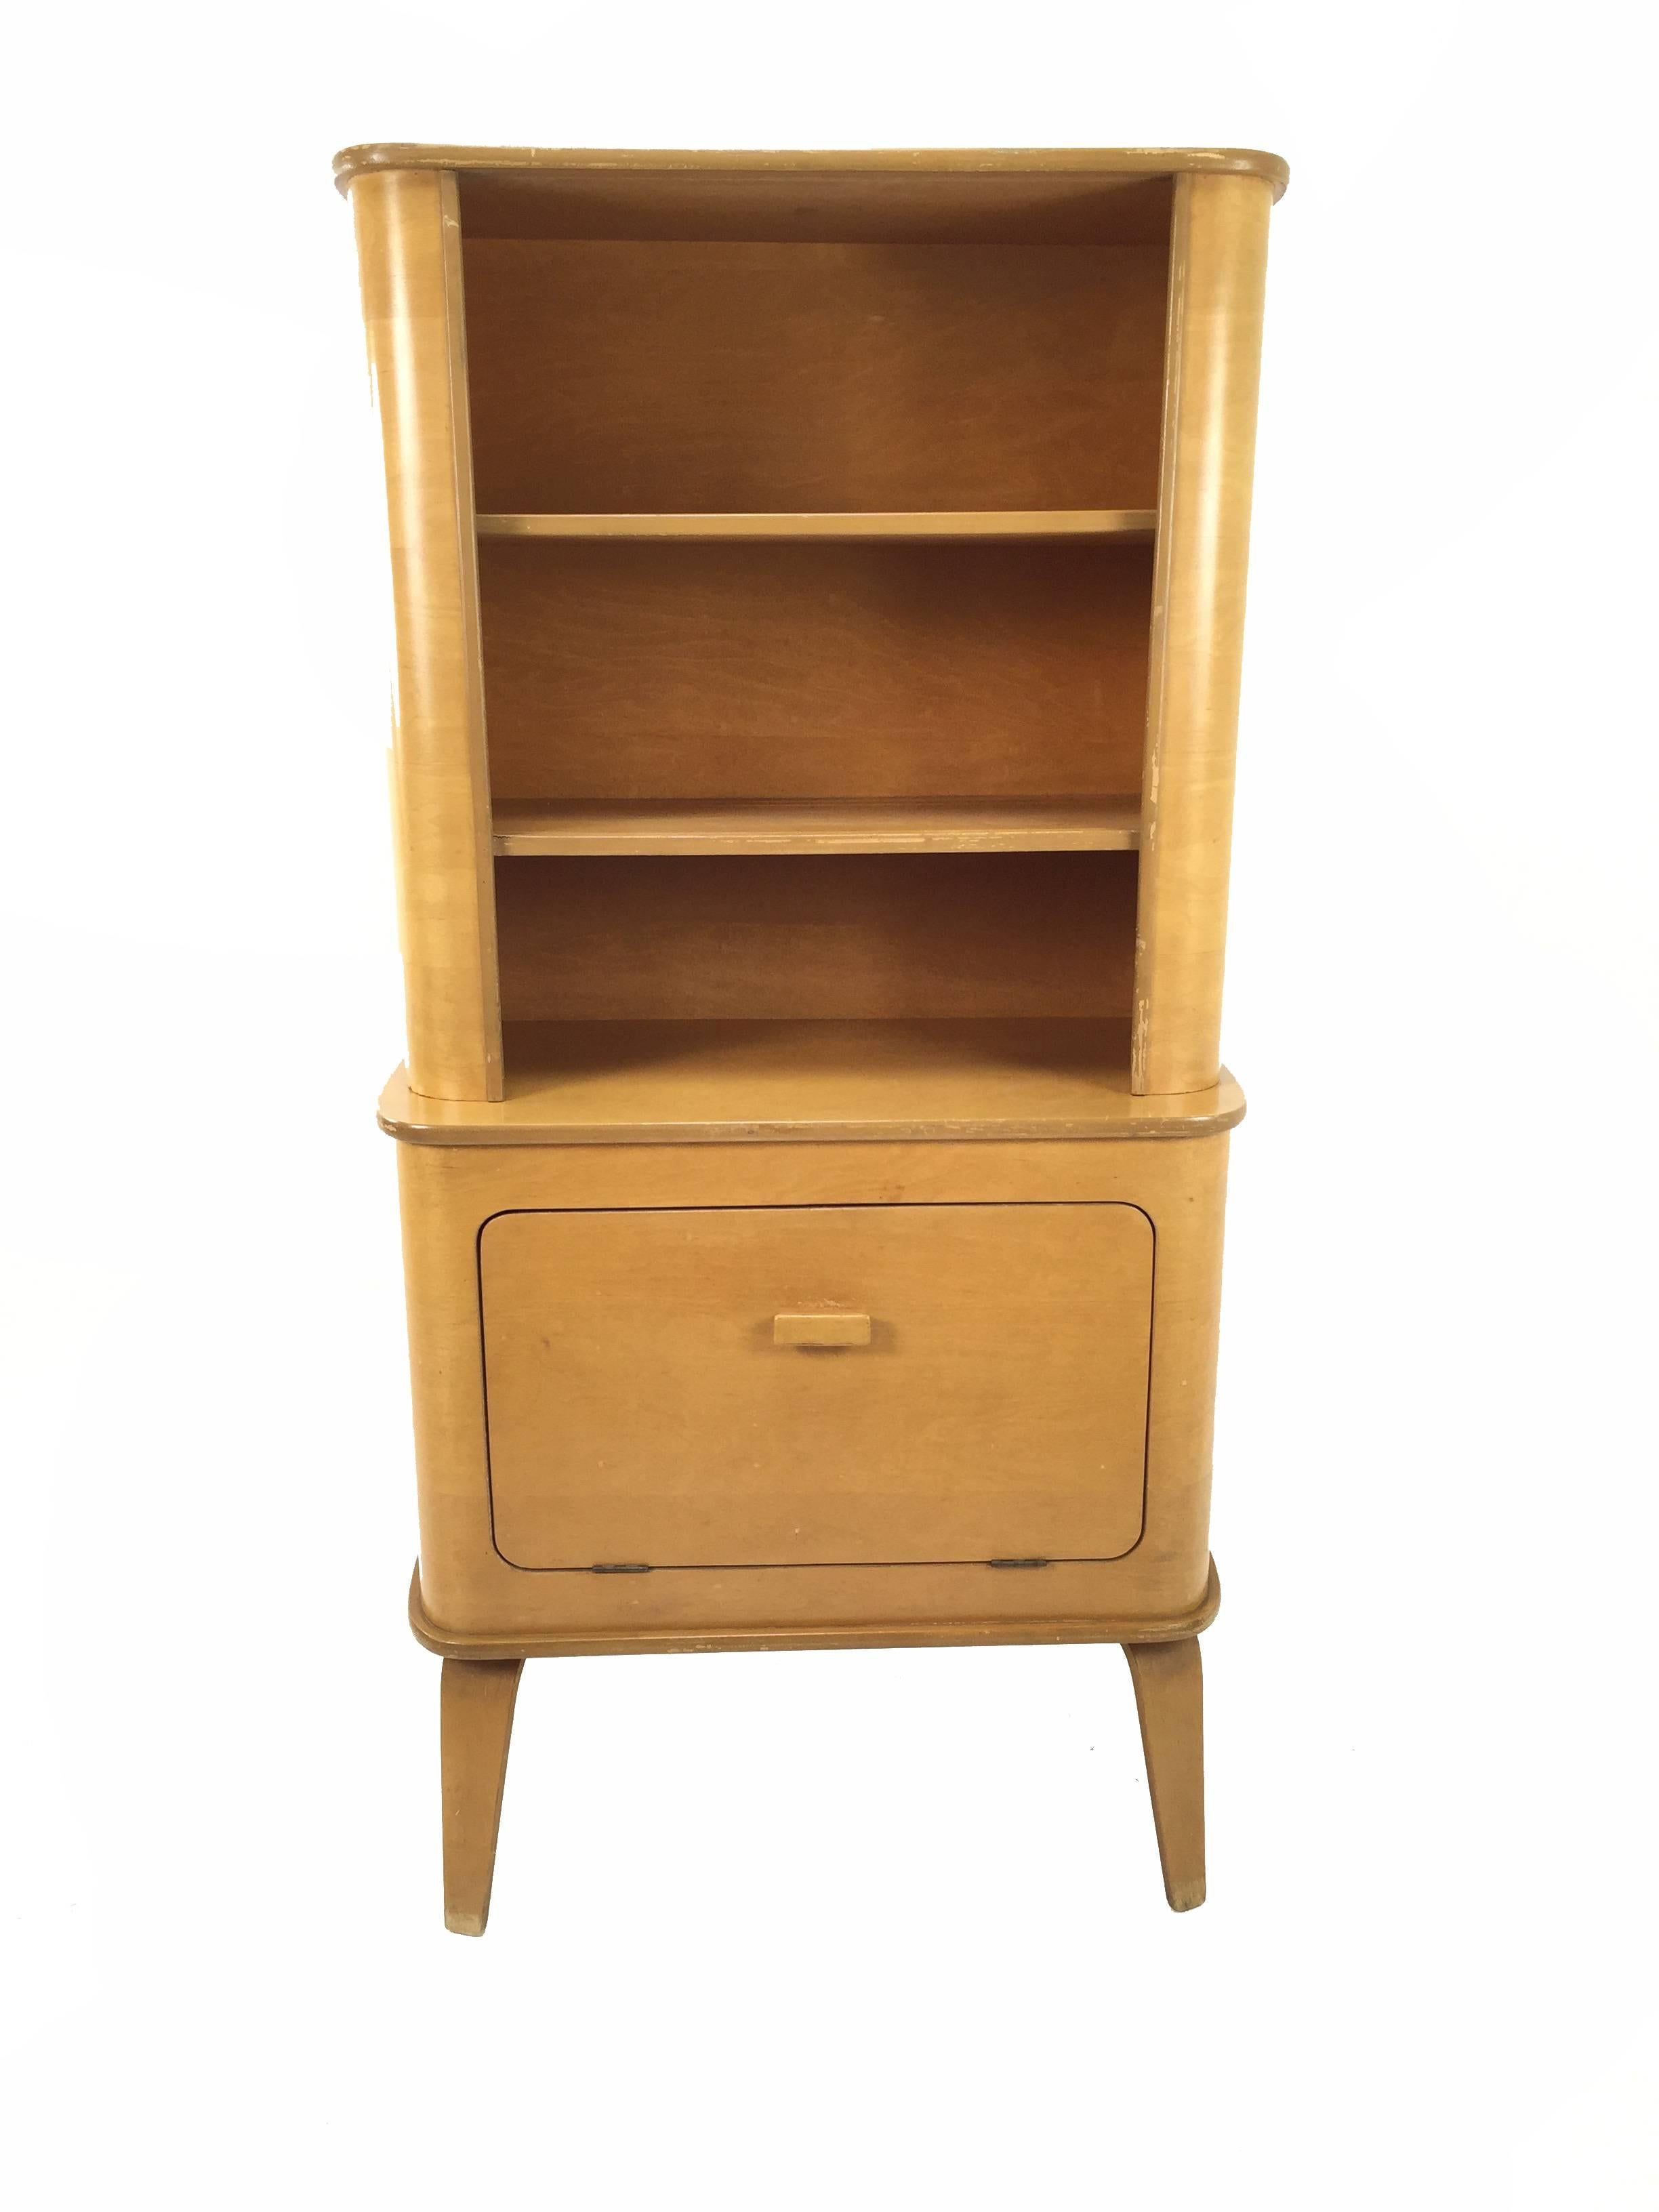 Thaden Jordan bar cabinet or hutch in blonde birch veneer bent plywood. Produced for four years just after WW2 by Herbert von Thaden and Donal Lewis Jordan for their company. See matching cabinet and dinette set in our other listings.